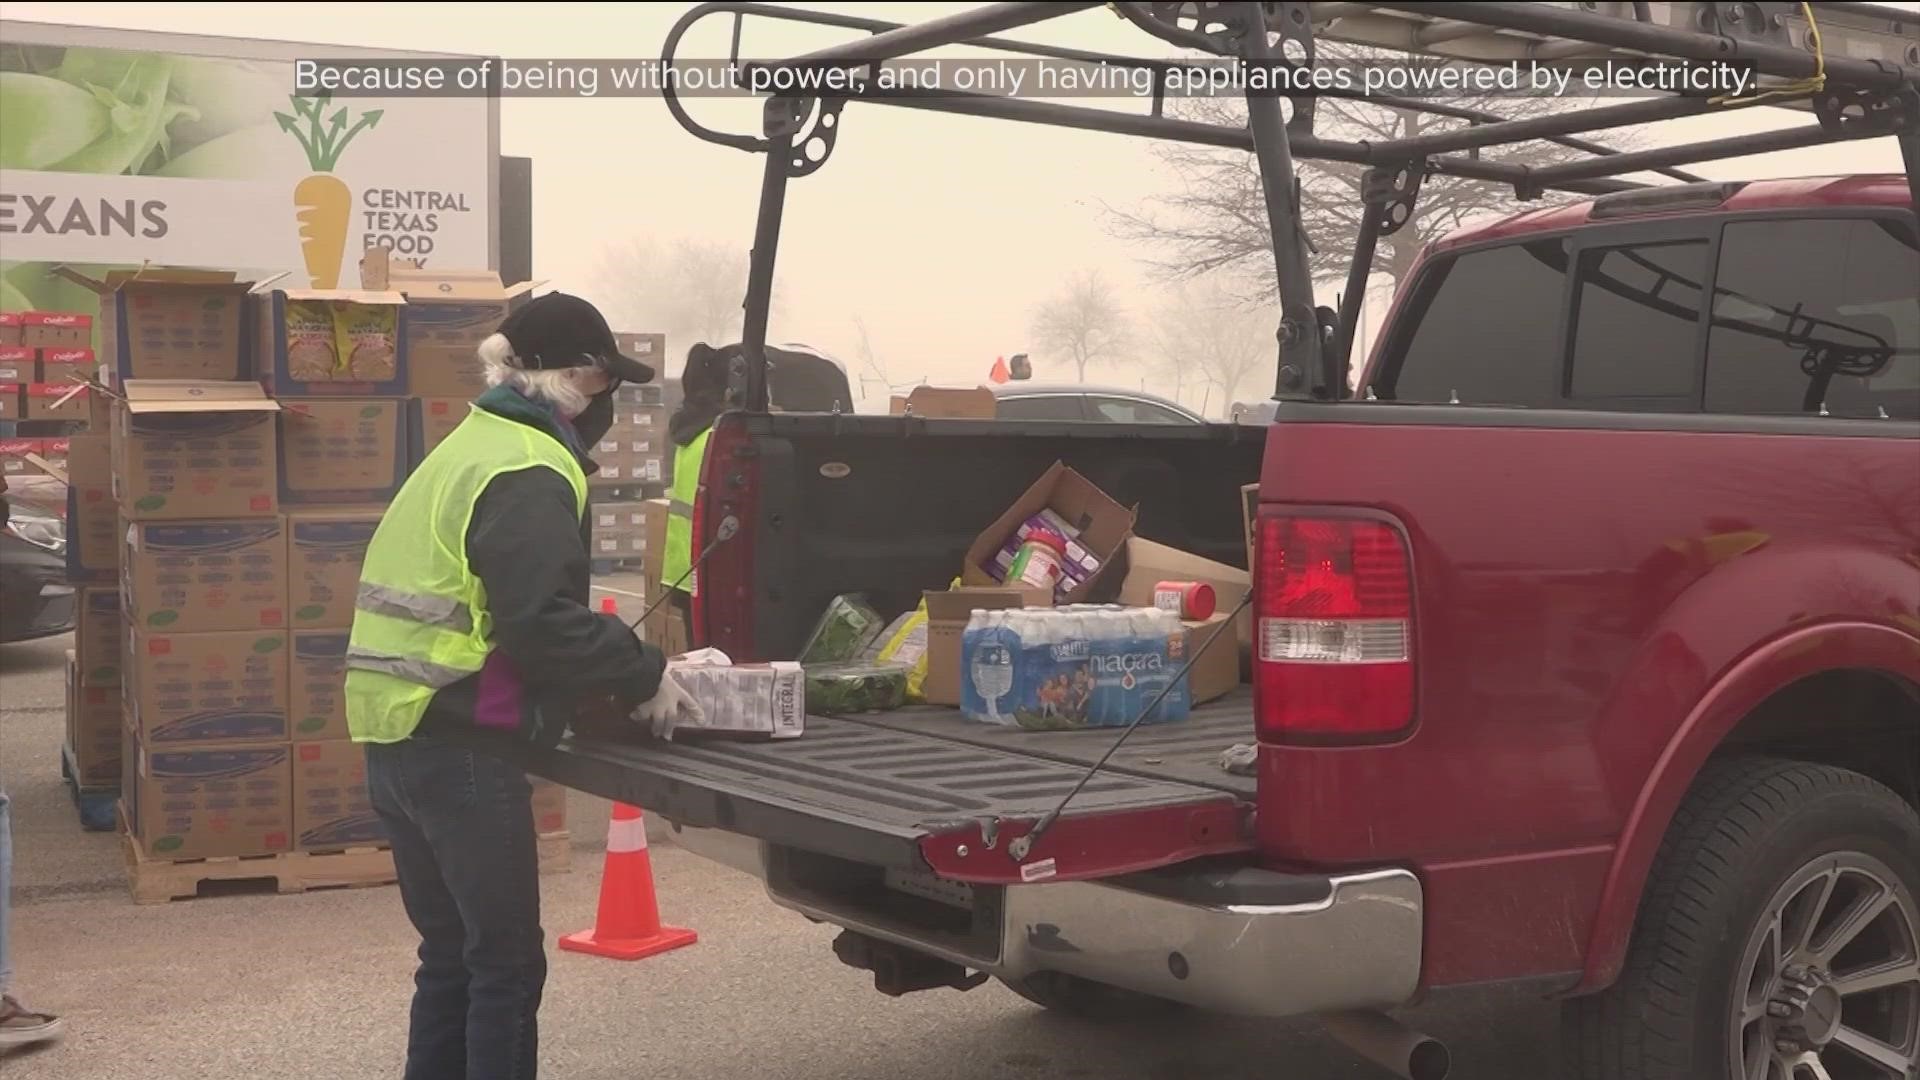 As the city worked to restore power, multiple food distribution events happened on Saturday.